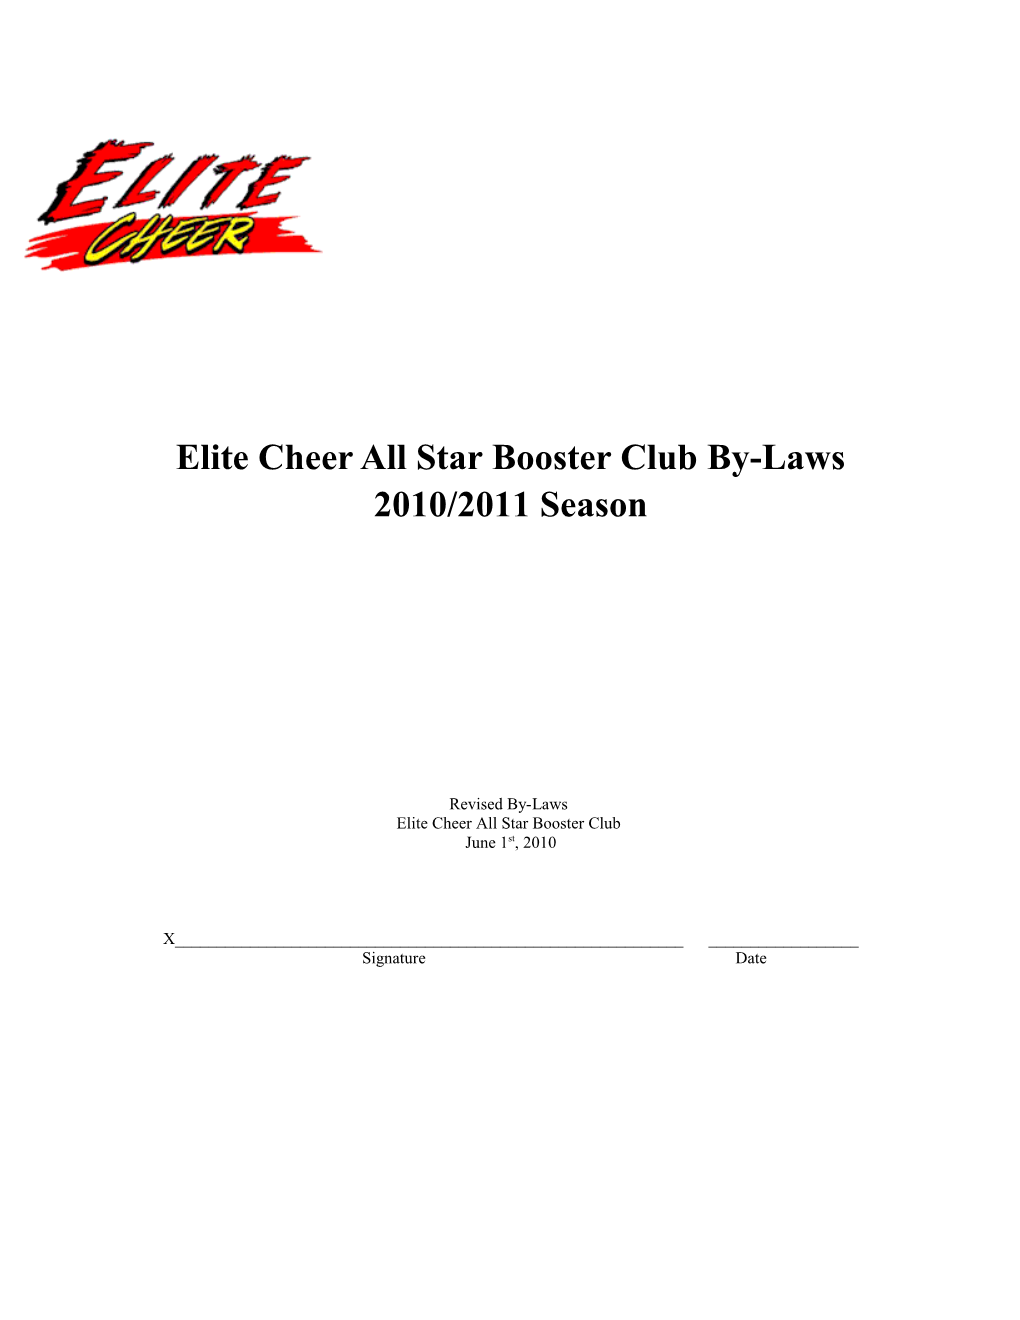 Elite Cheer All Star Booster Club By-Laws